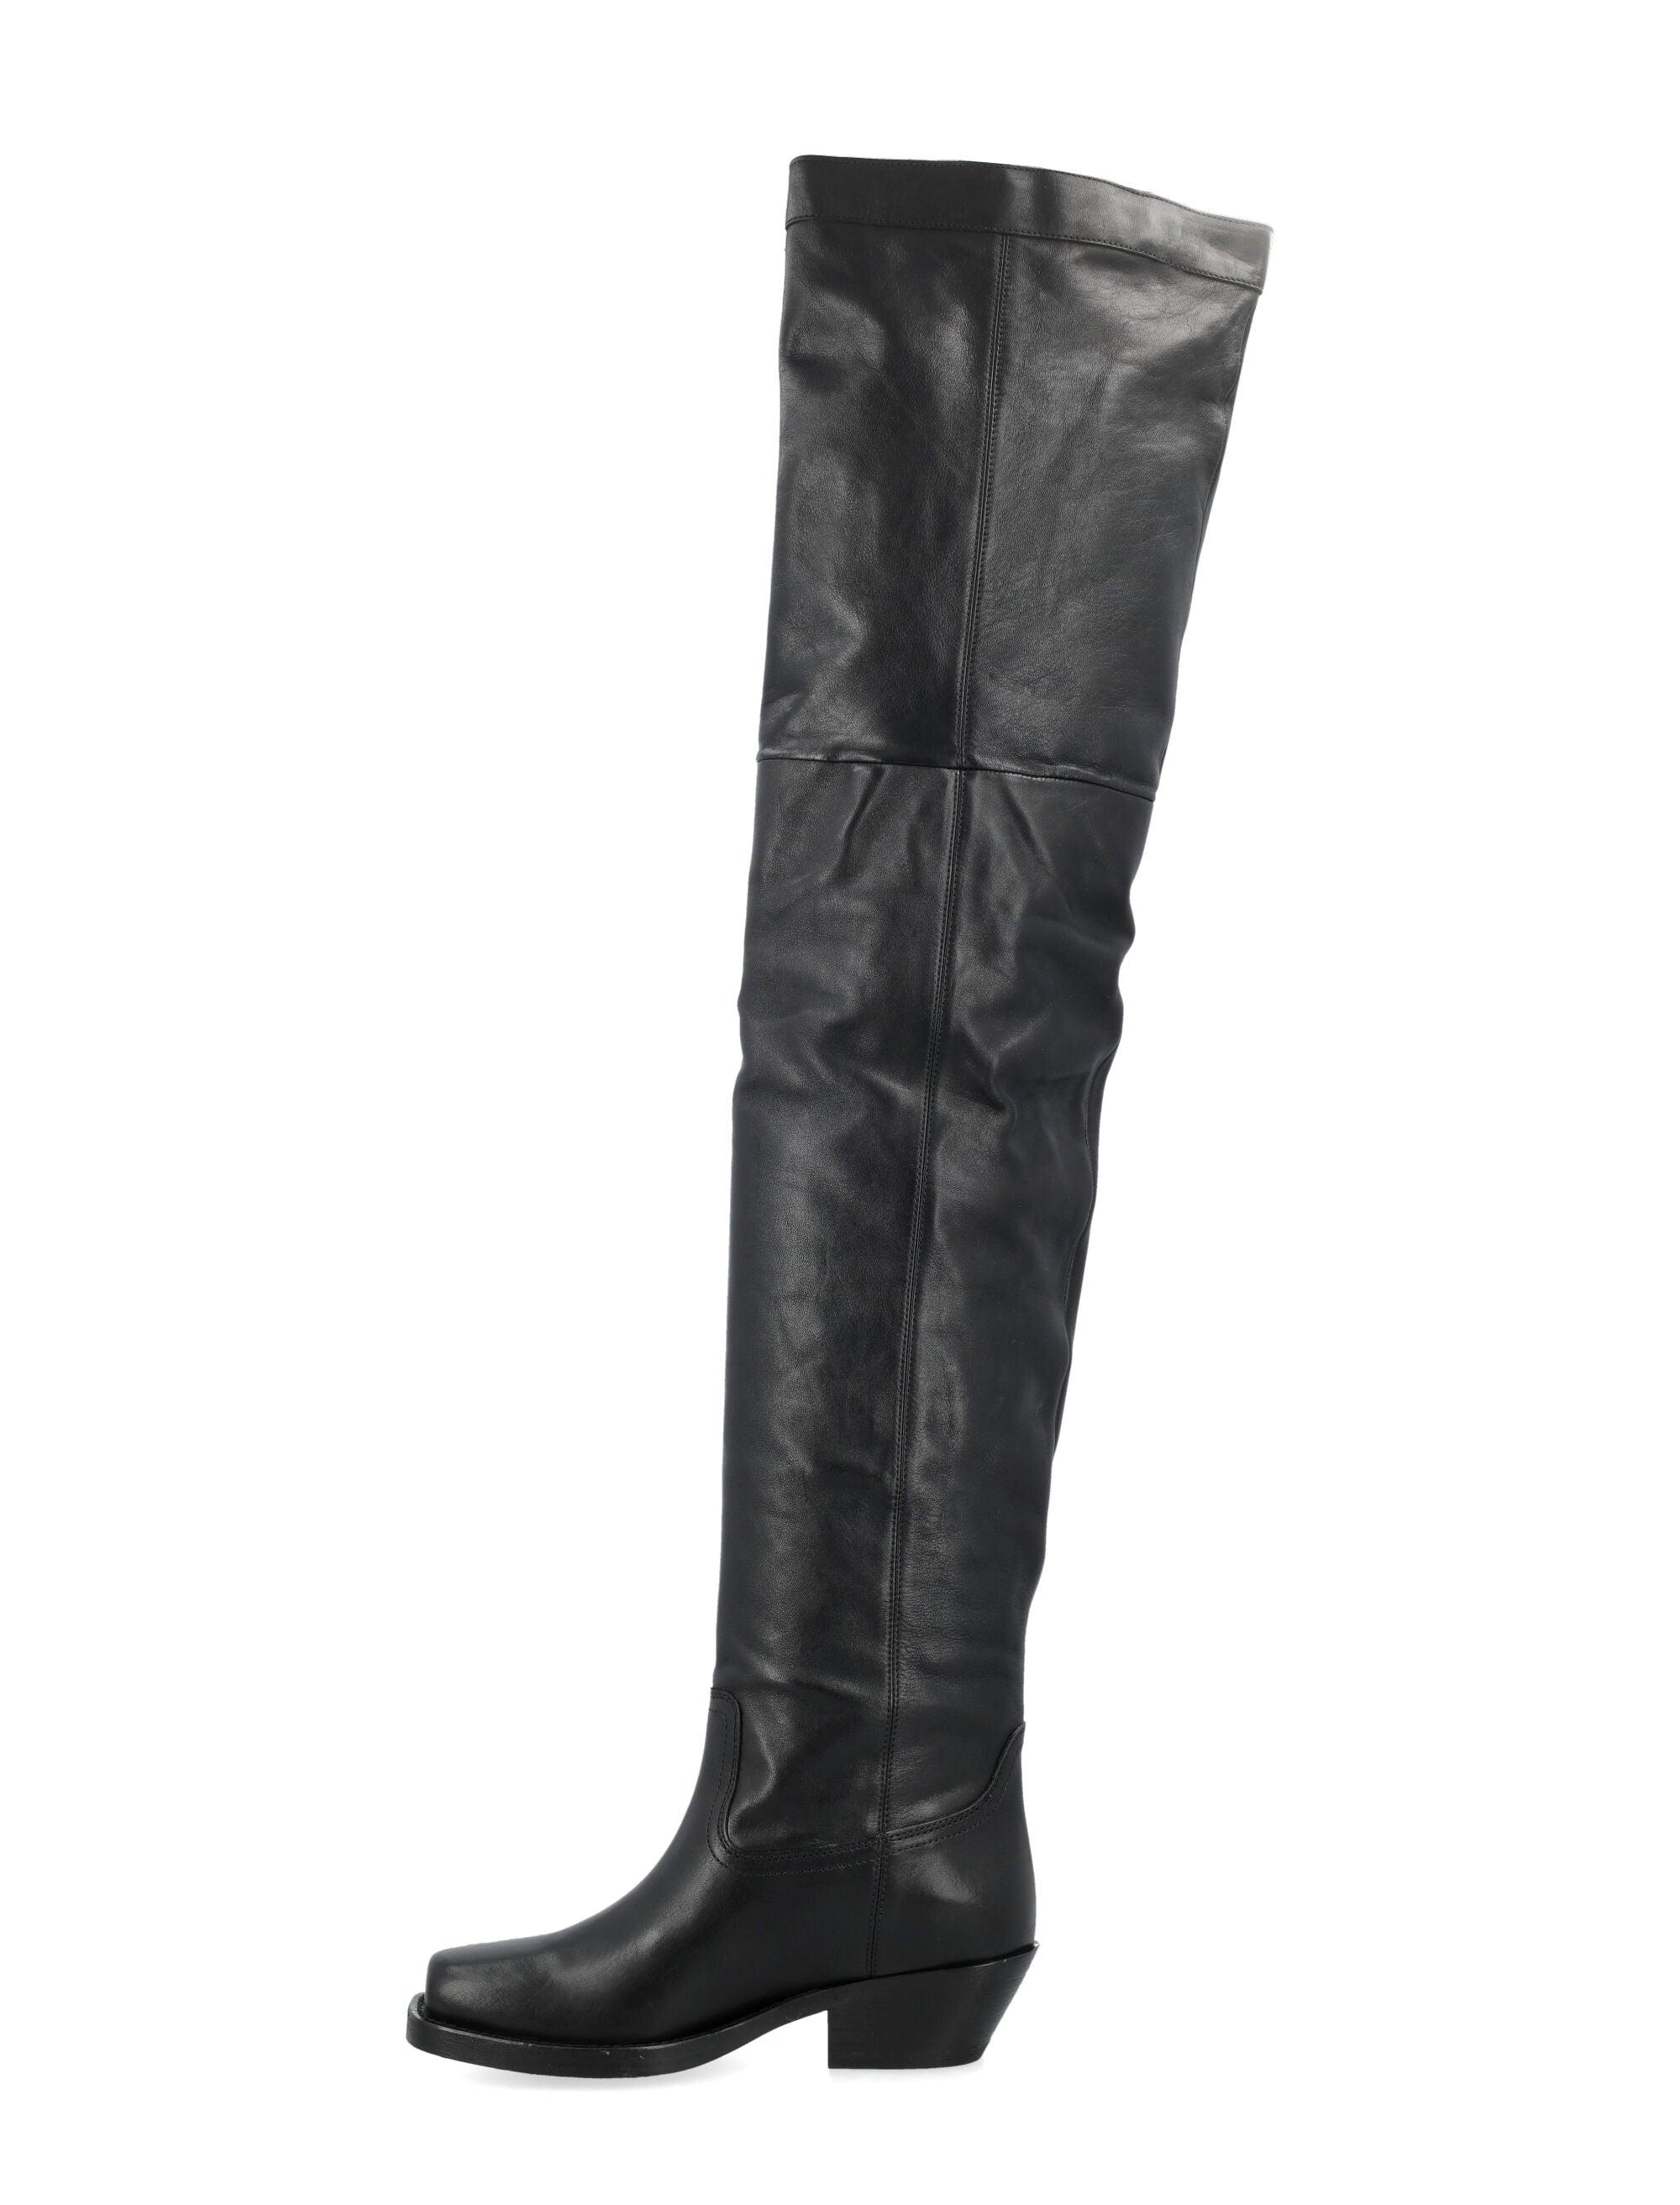 ISABEL_MARANT_Amati_over_knee_boots_24ACD0011FAB3A23S_01BK_3.jpg